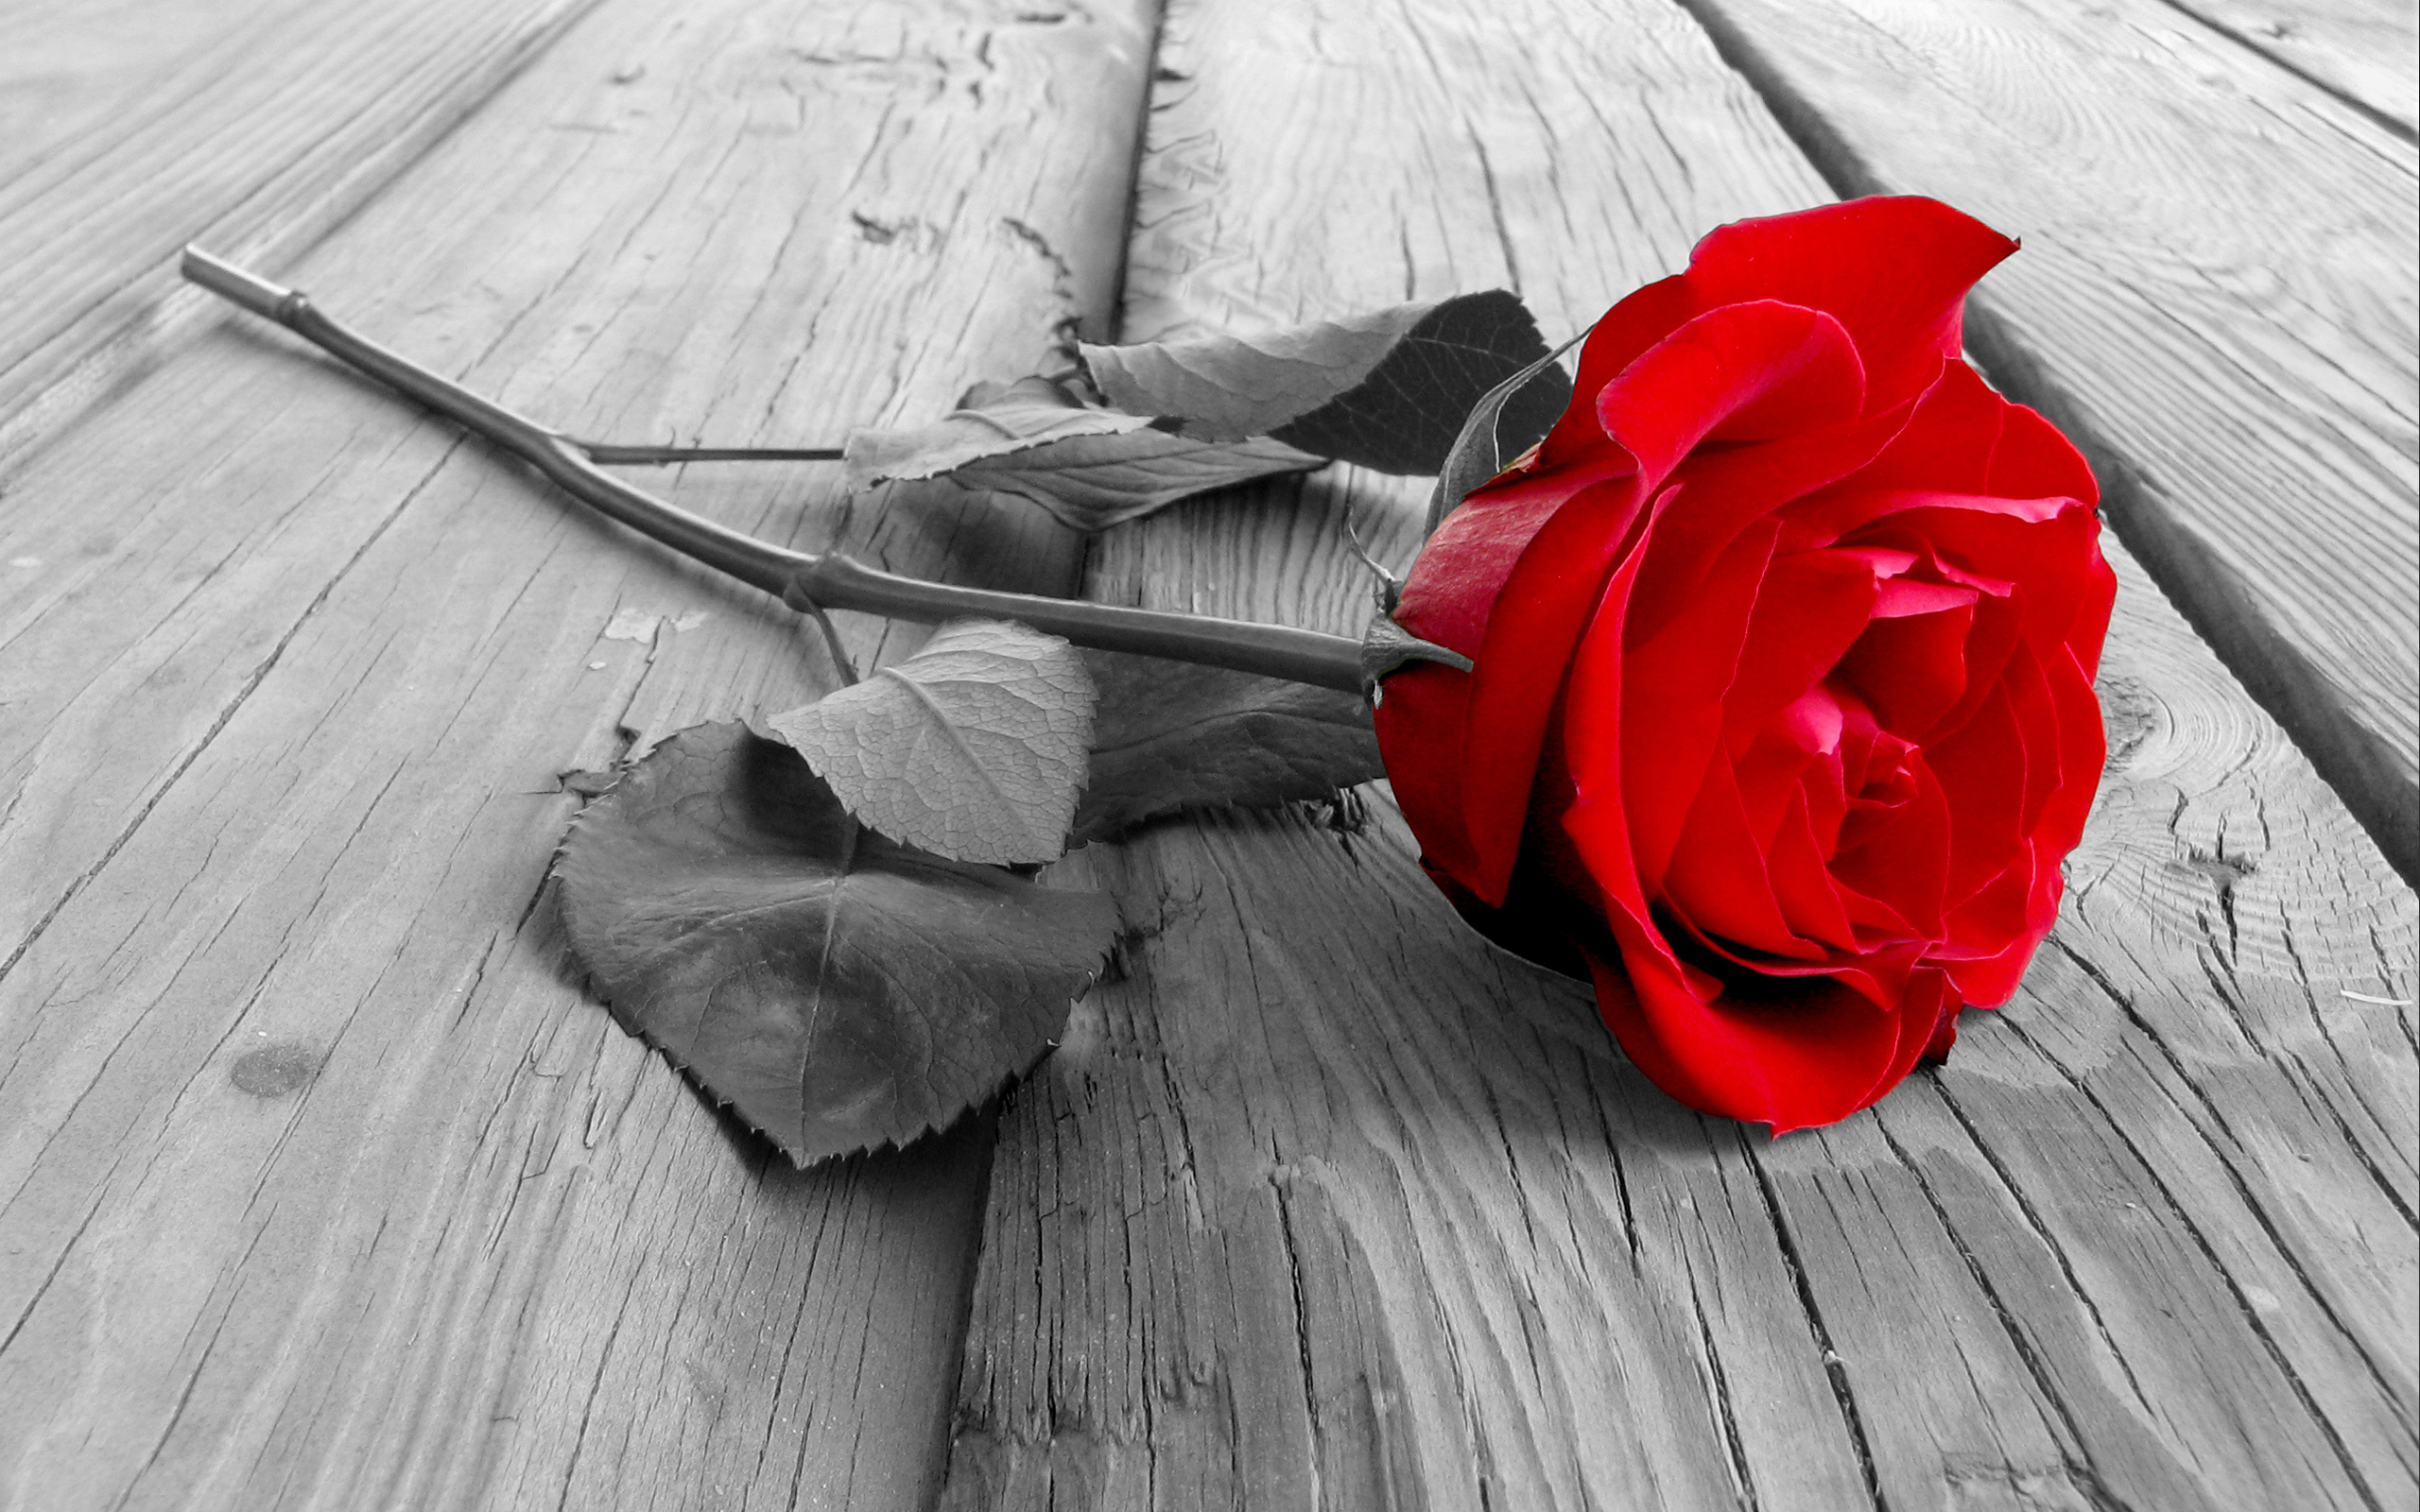 rose, red rose, earth, flower, selective color, flowers